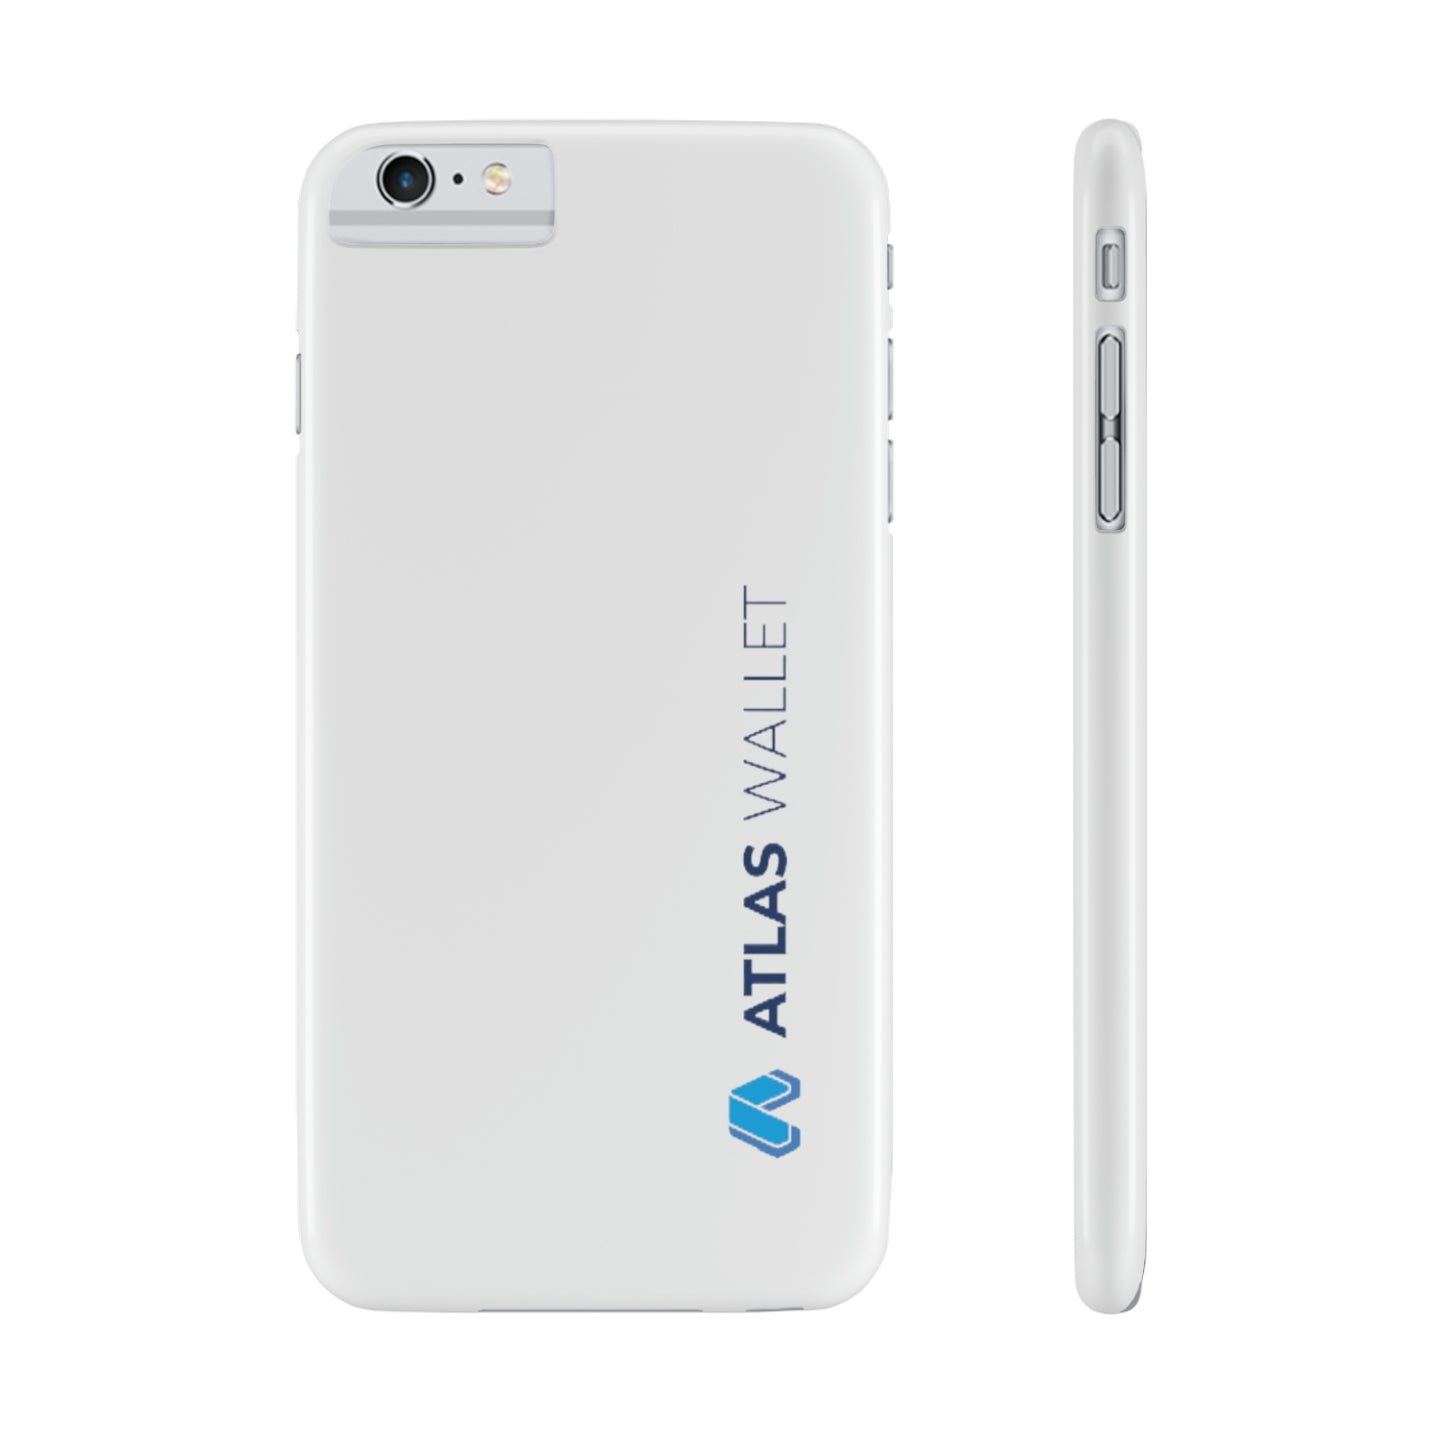 Slim Phone Cases, Case-Mate - Atlas Wallet with logo